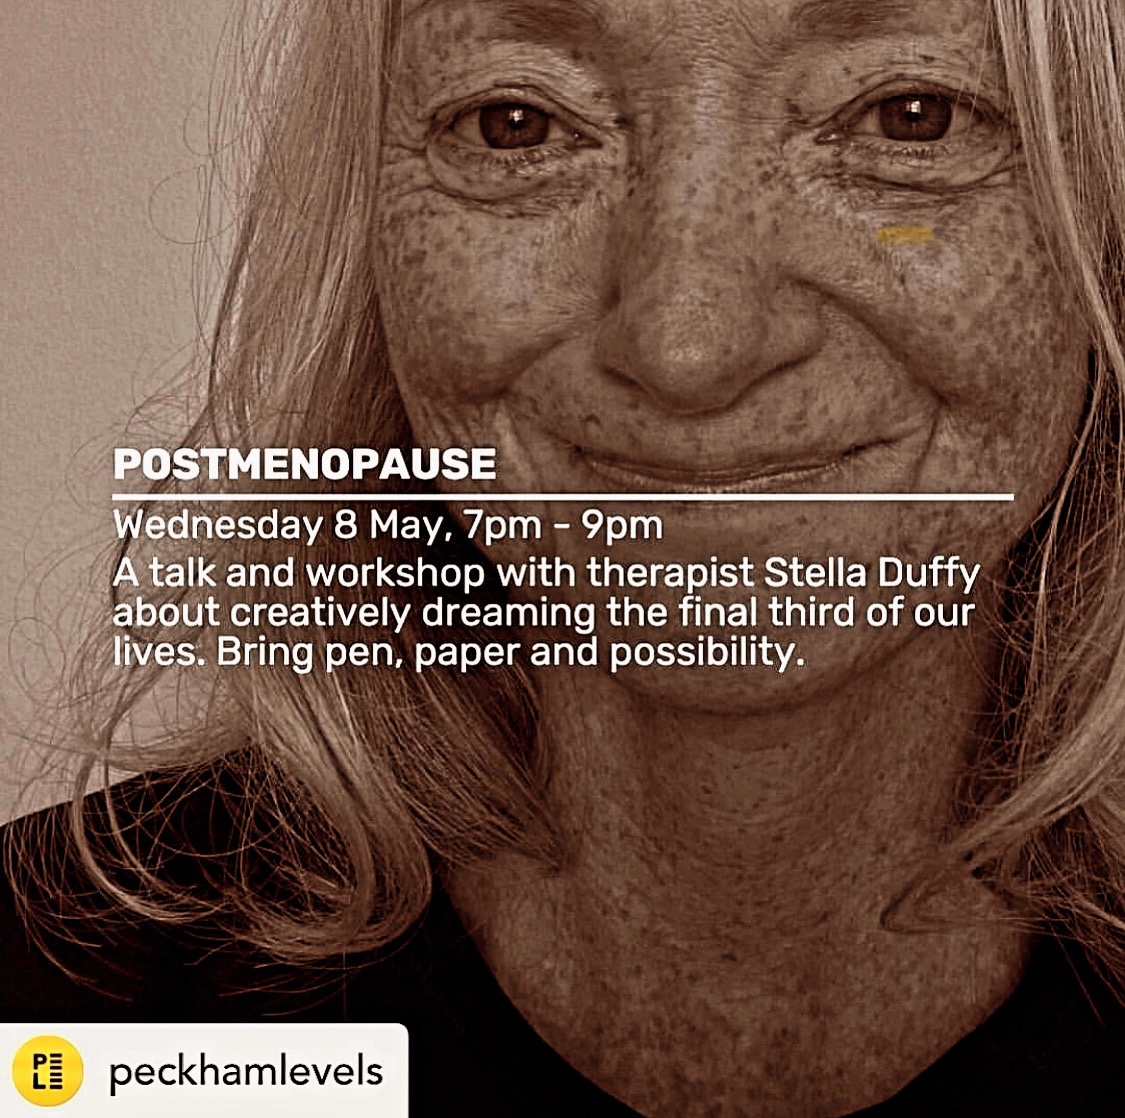 Excited to offer the first workshop from my research - dreaming our #creative #postmenopause - the possibilities beyond the #ageism & #misogyny that tell us #menopause is the end! Weds 8th, 7-9pm, @peckhamlevels Booking: eventbrite.com/e/conversation…